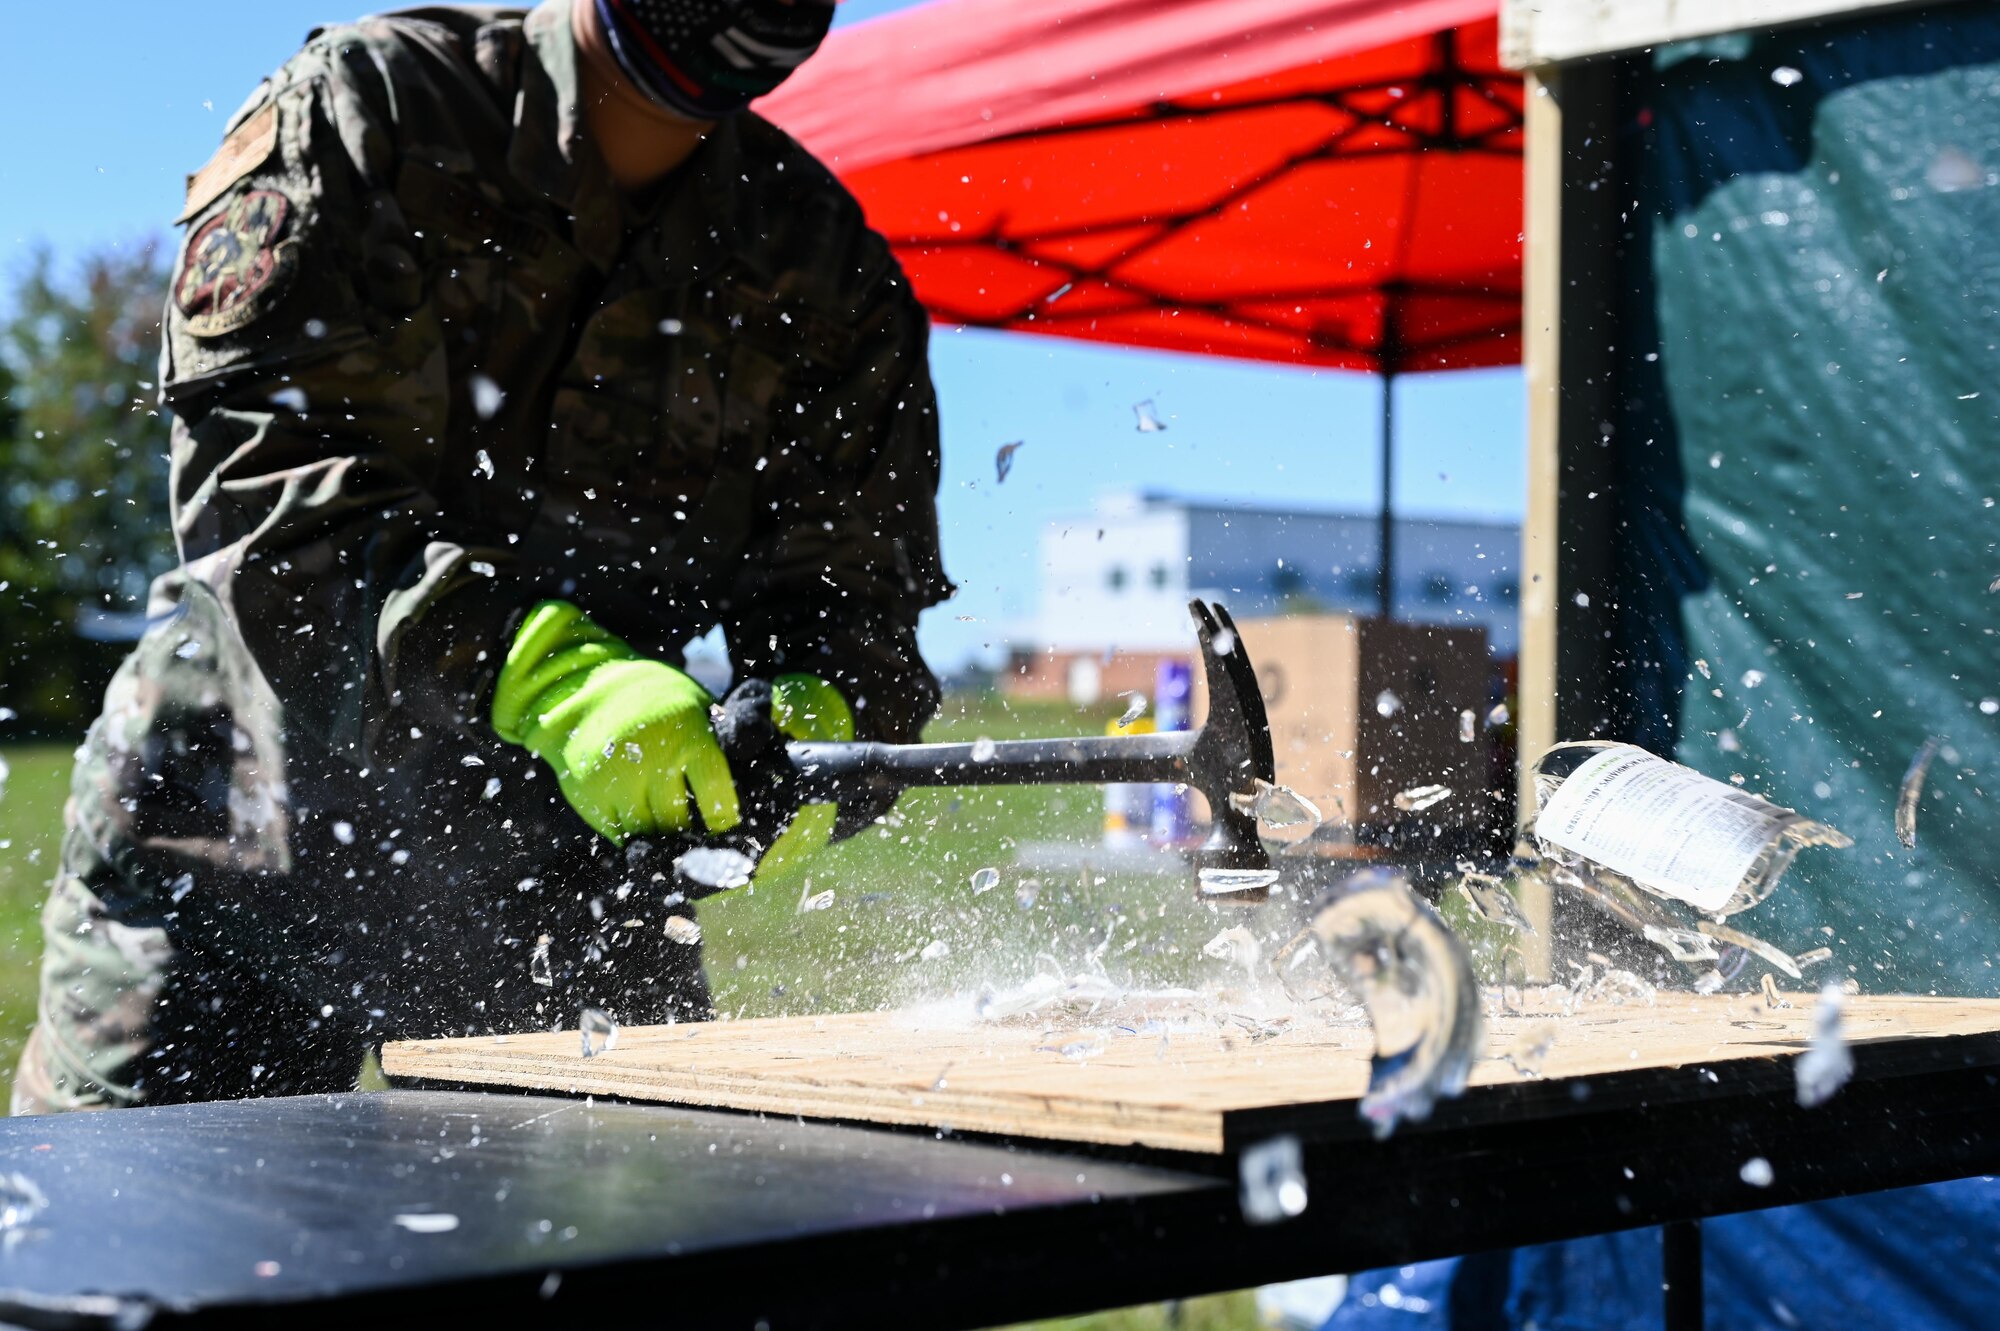 An Airmen from the 175th Wing hits a glass bottle with a hammer Oct. 3, 2020, during a “Therapy Breaking” event Oct. 3, 2020, at Warfield Air National Guard Base, Middle River, Md. This event was part of the third annual Wellness Week where activities were organized to promote wellness and decrease stress. (U.S. Air National Guard photo by Senior Airman Sarah M. McClanahan)